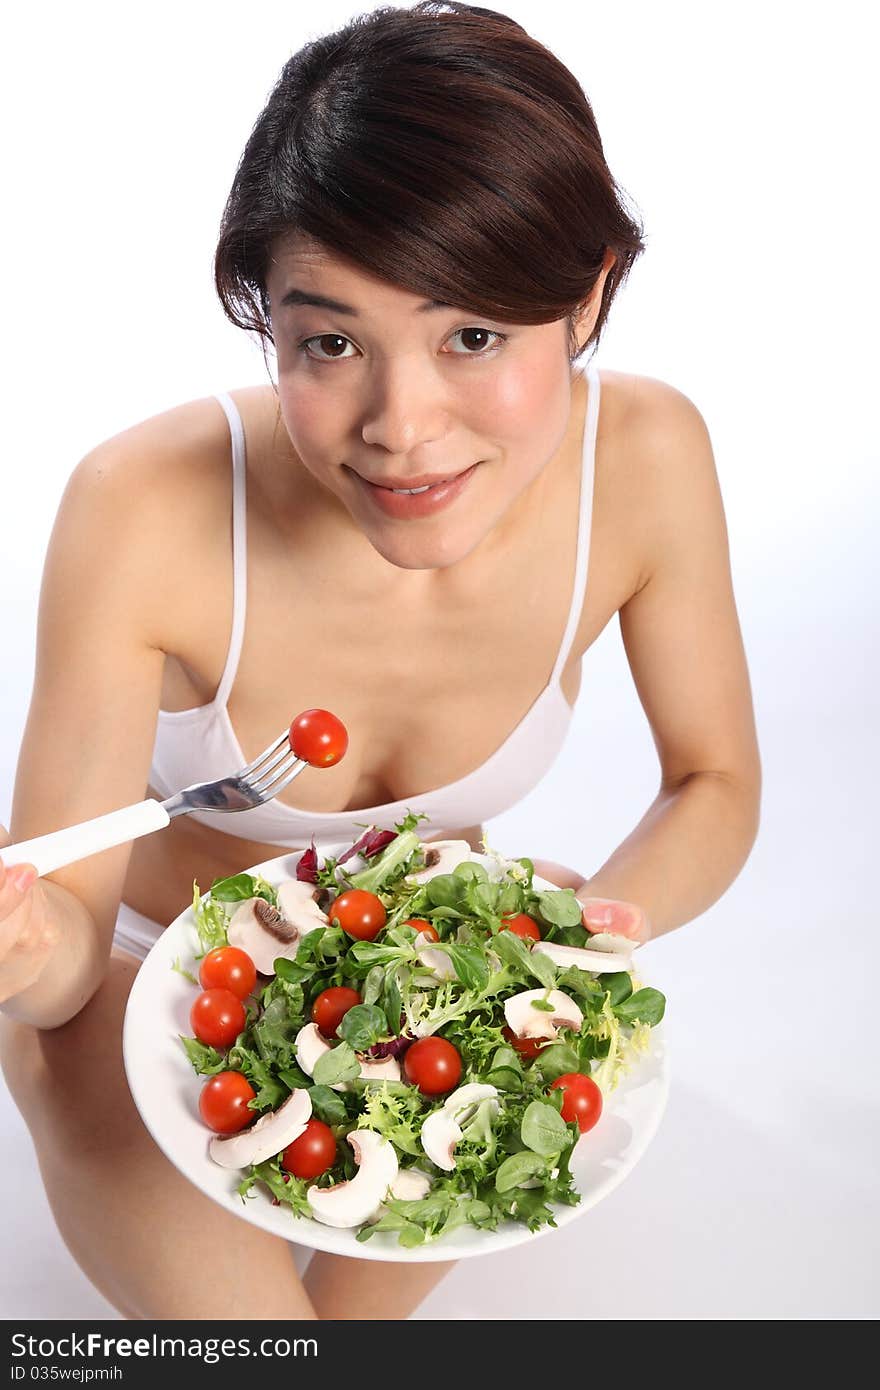 Beautiful, smiling young Japanese girl, wearing white sports bra, showing off a healthy body while eating a green salad. Beautiful, smiling young Japanese girl, wearing white sports bra, showing off a healthy body while eating a green salad.